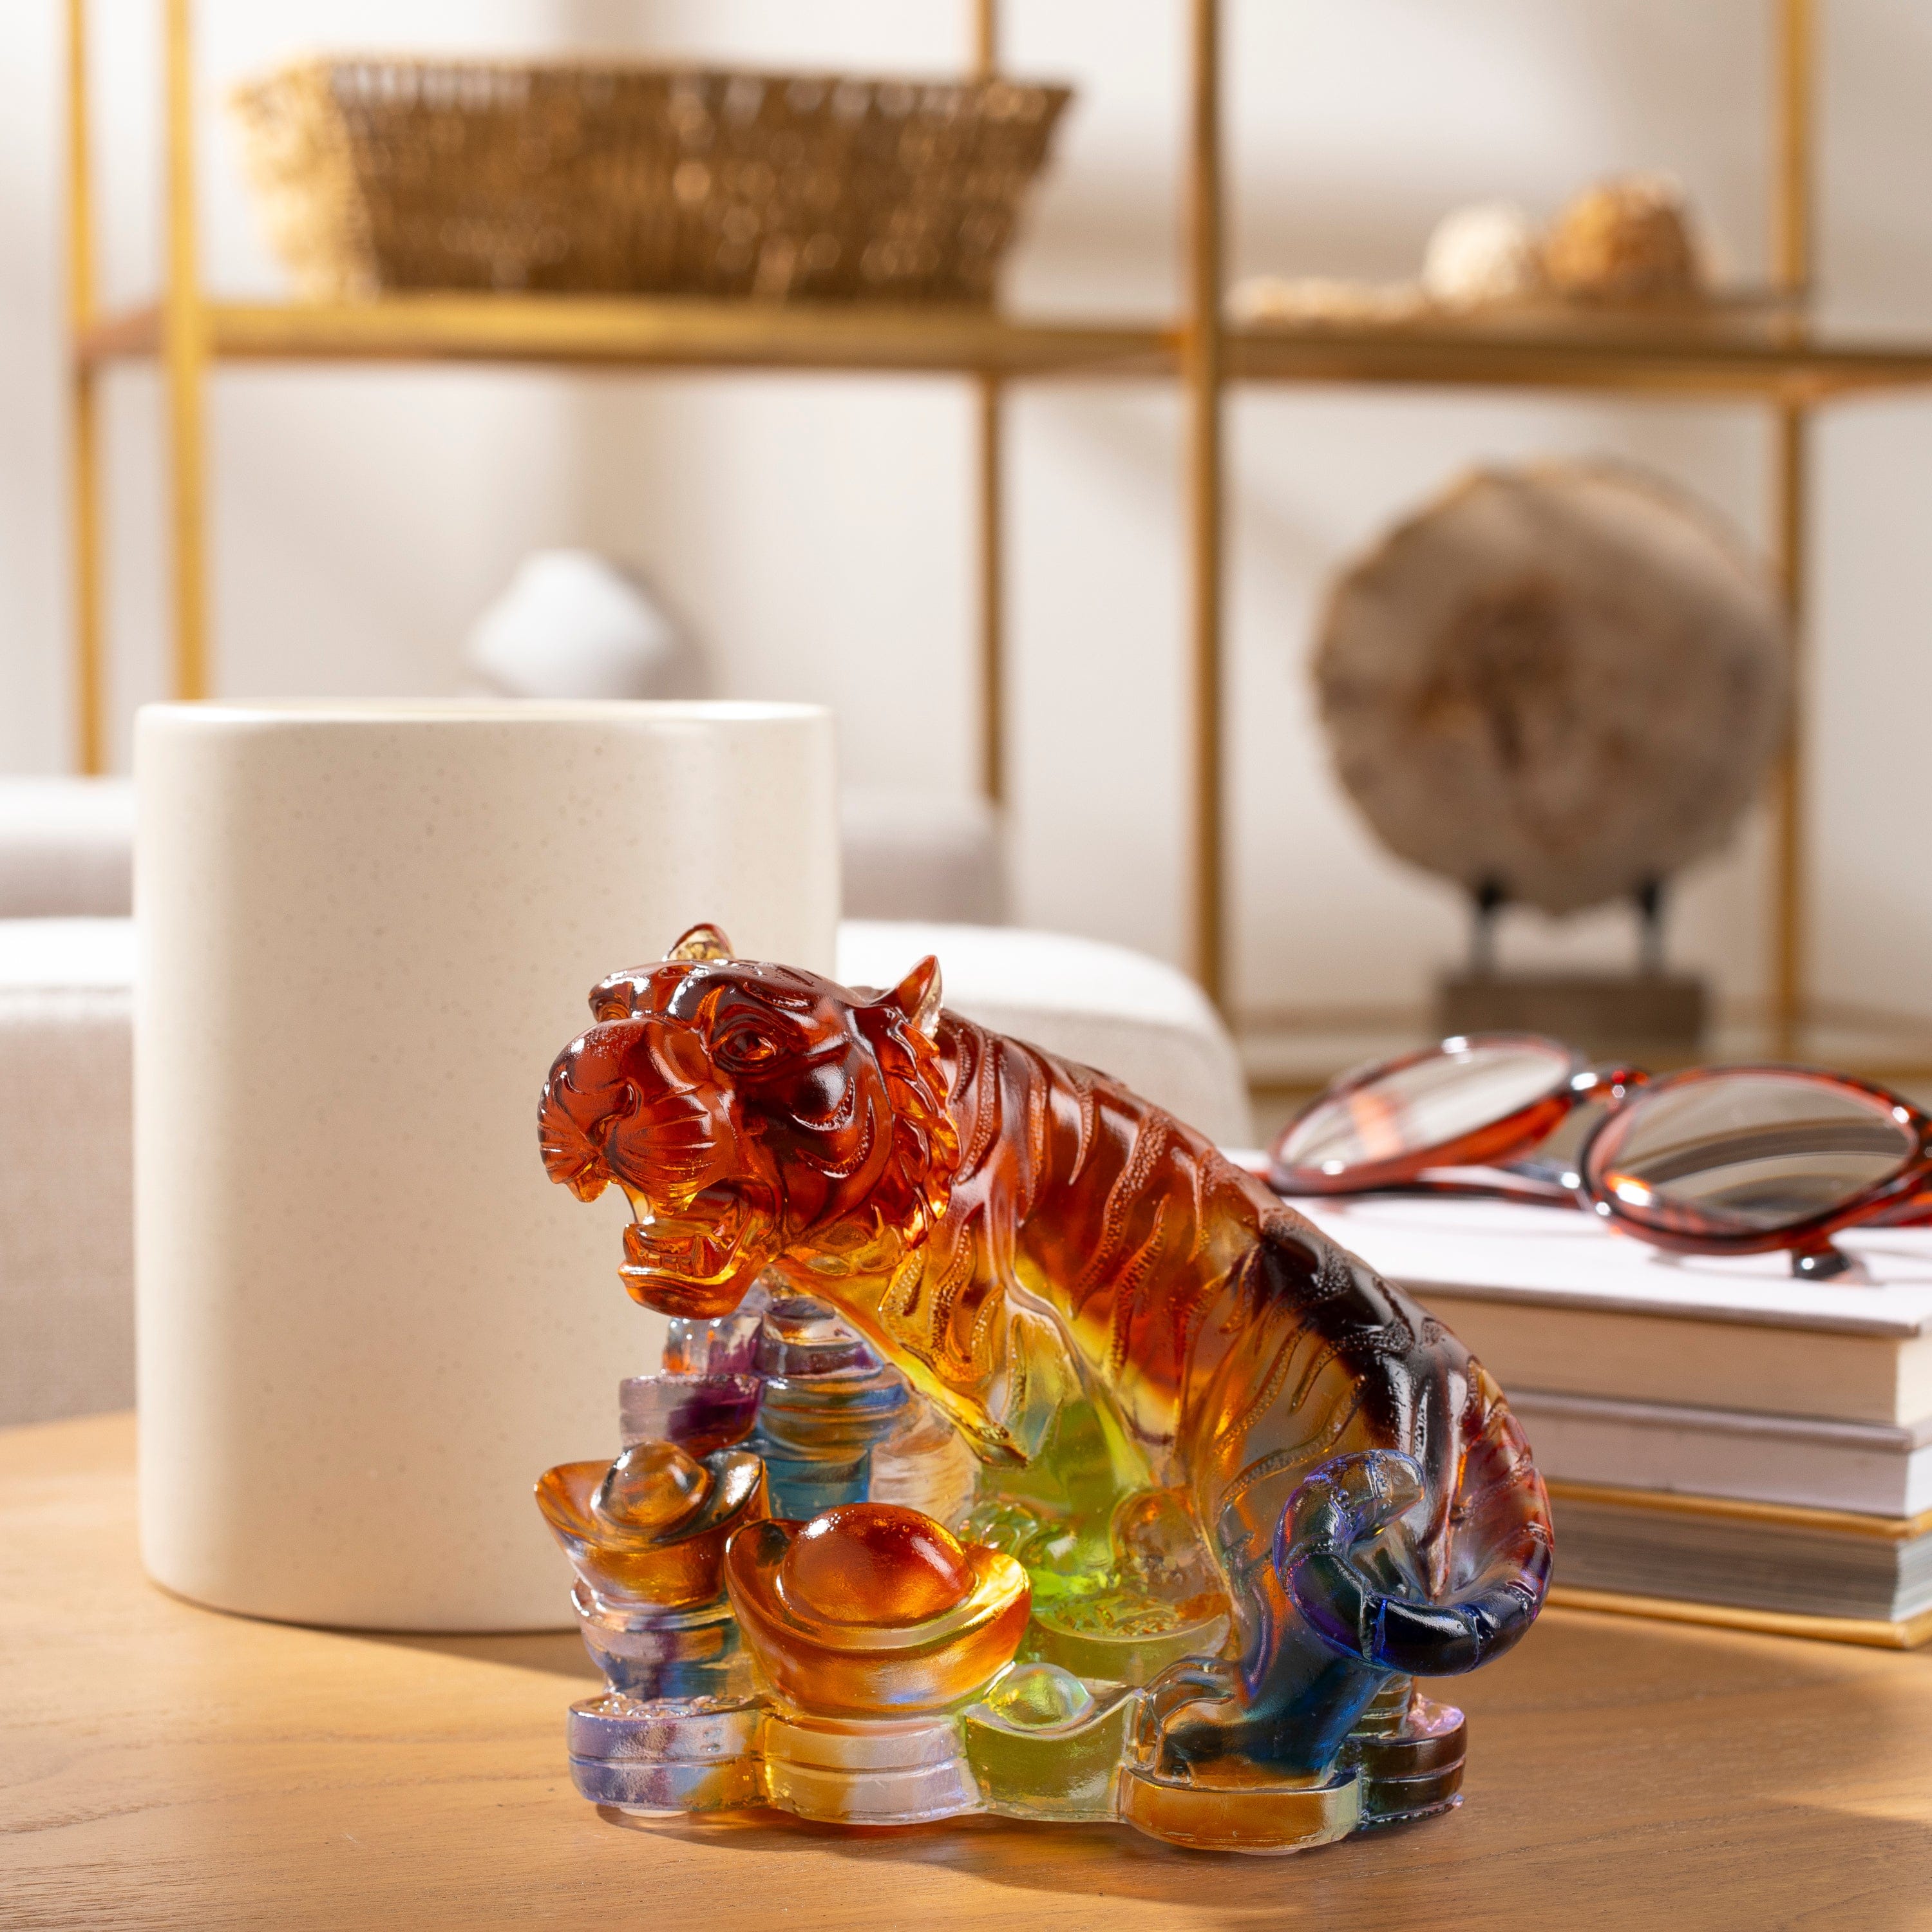 Kalifano Crystal Carving Roaring Tiger Crystal Carving - A Symbol of Courage and Strength CRZ210-TIG